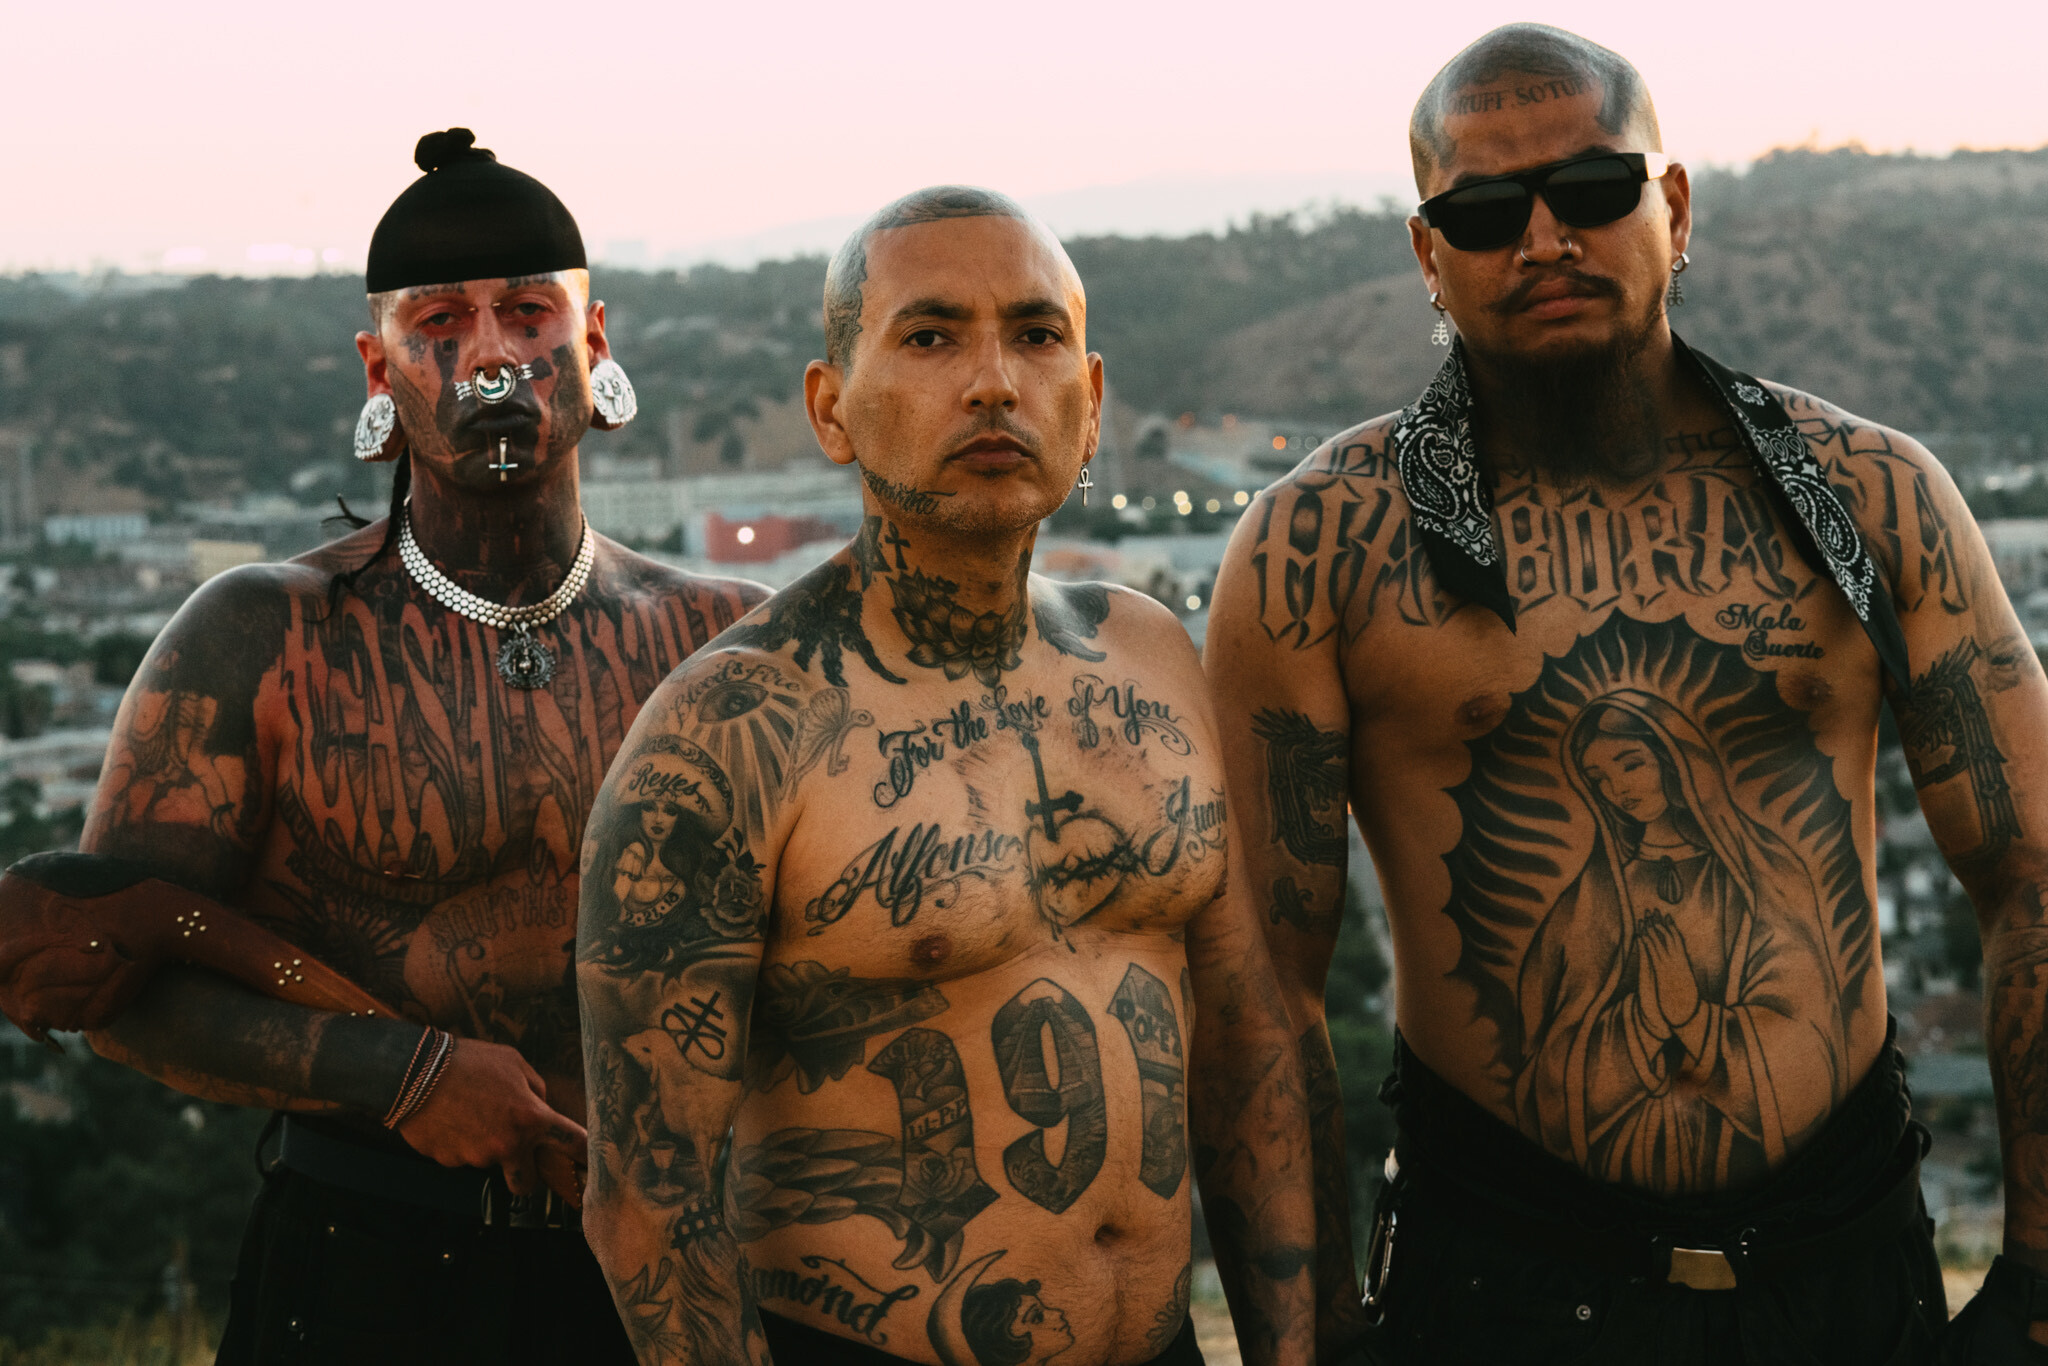 Choloani' Is a History Lesson in What It Means To Be a Cholo.